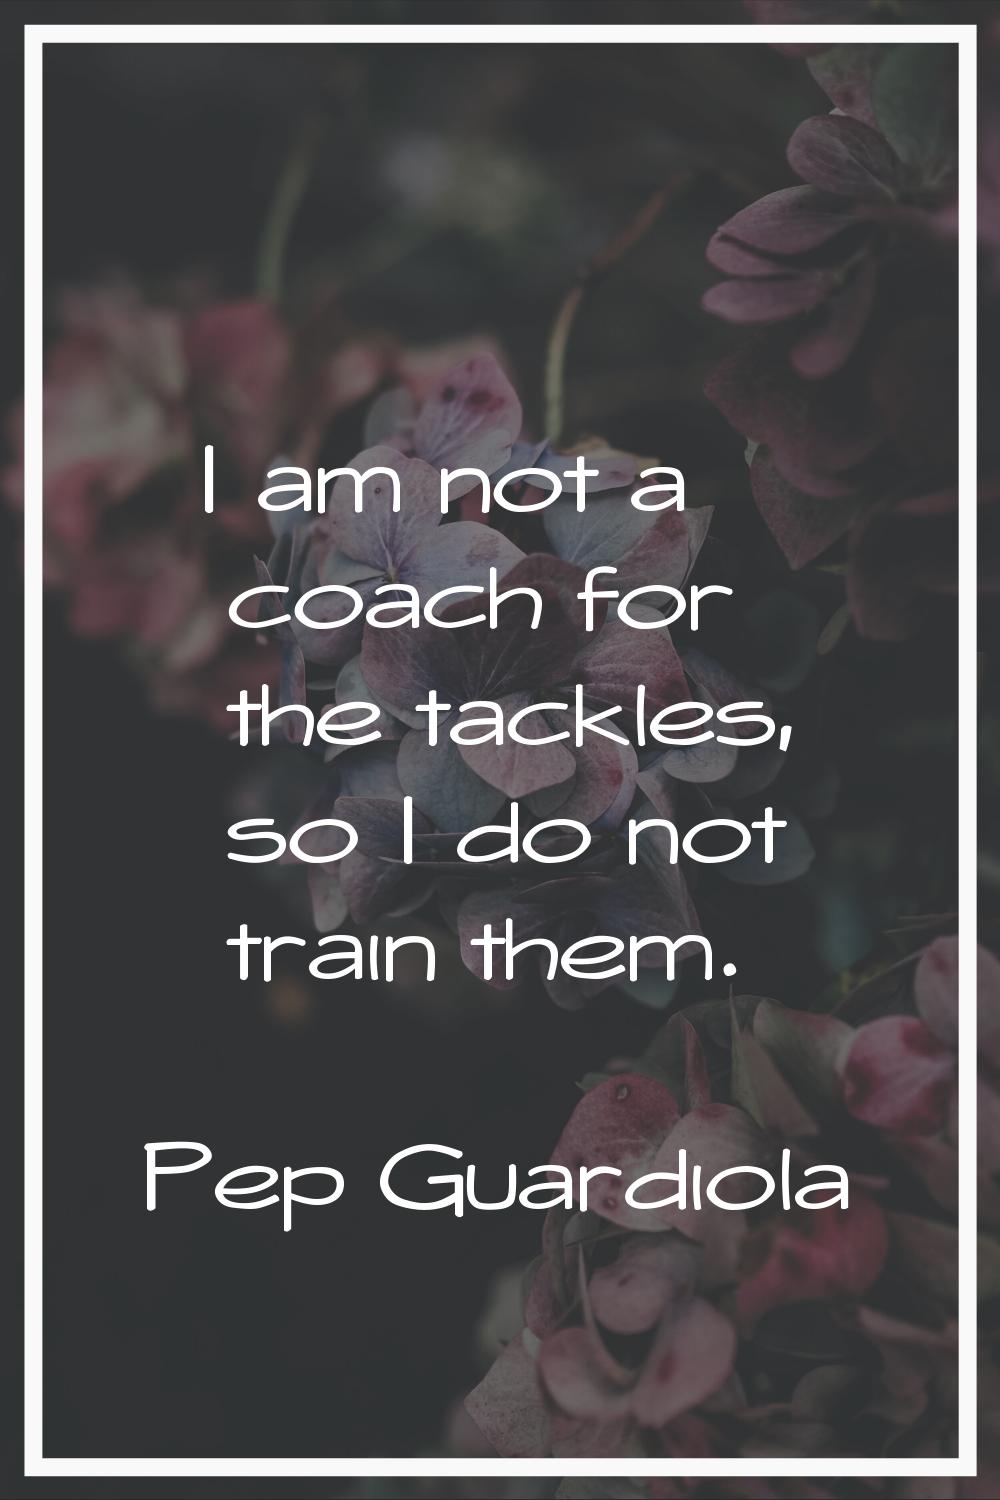 I am not a coach for the tackles, so I do not train them.